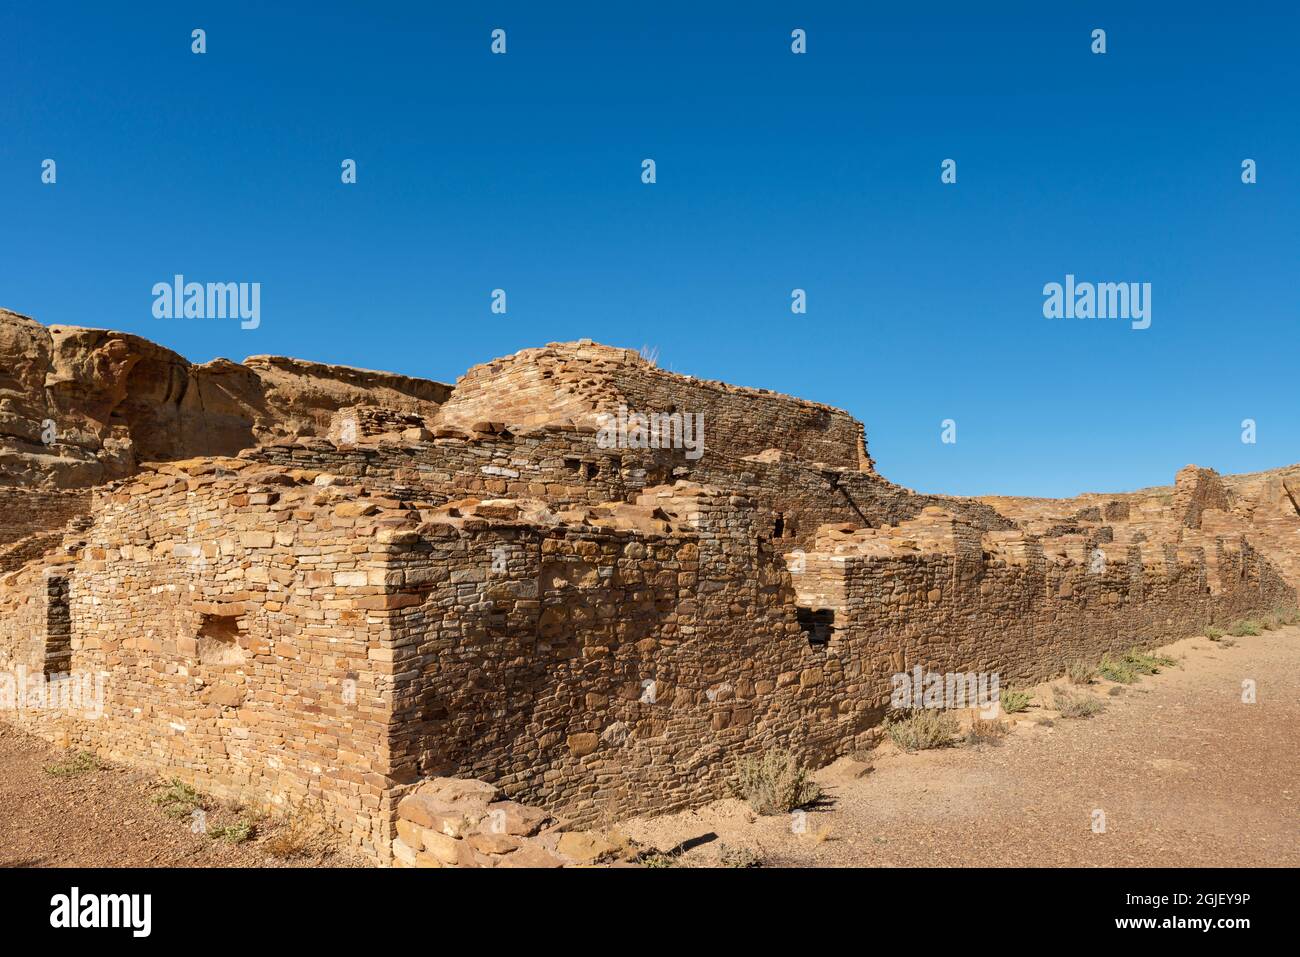 USA, New Mexico. Chaco Culture National Historic Park, Remains of Chetro Ketl, a stonewall masonry dwelling or Great House which began about AD 1000. Stock Photo